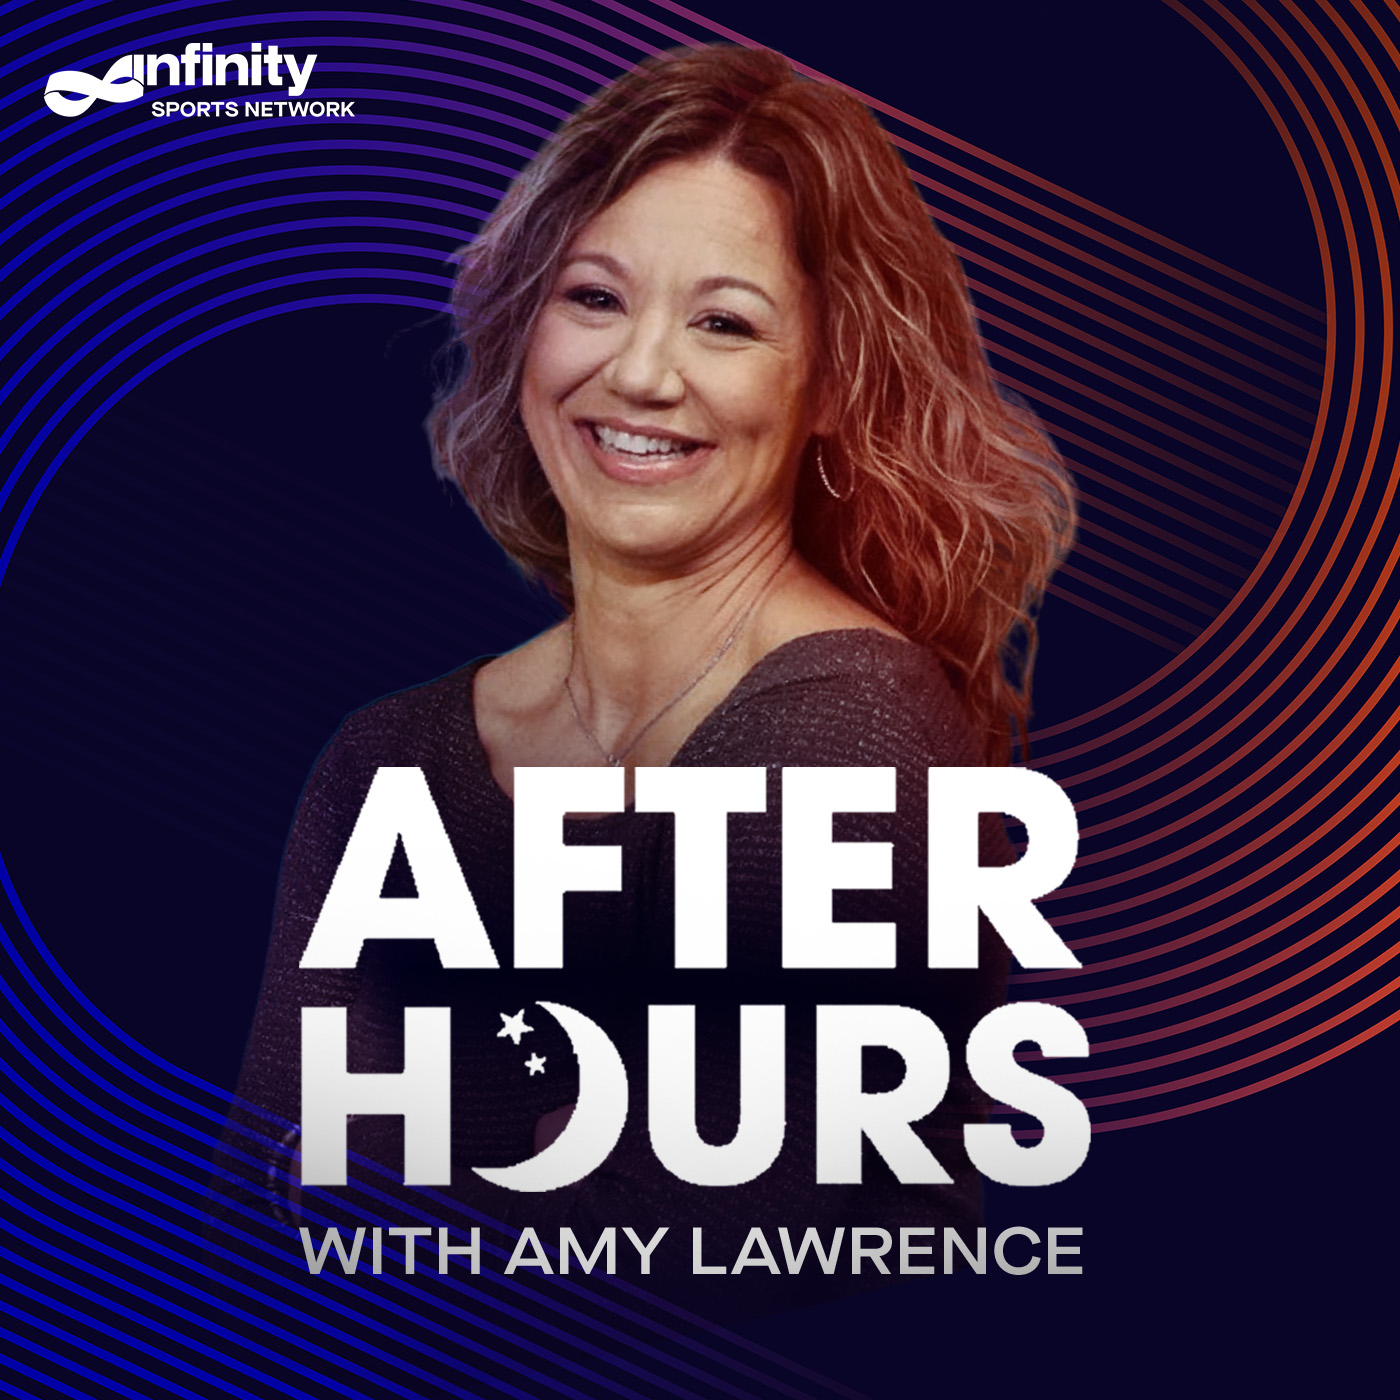 4/1/21 After Hours with Amy Lawrence PODCAST: Hour 3